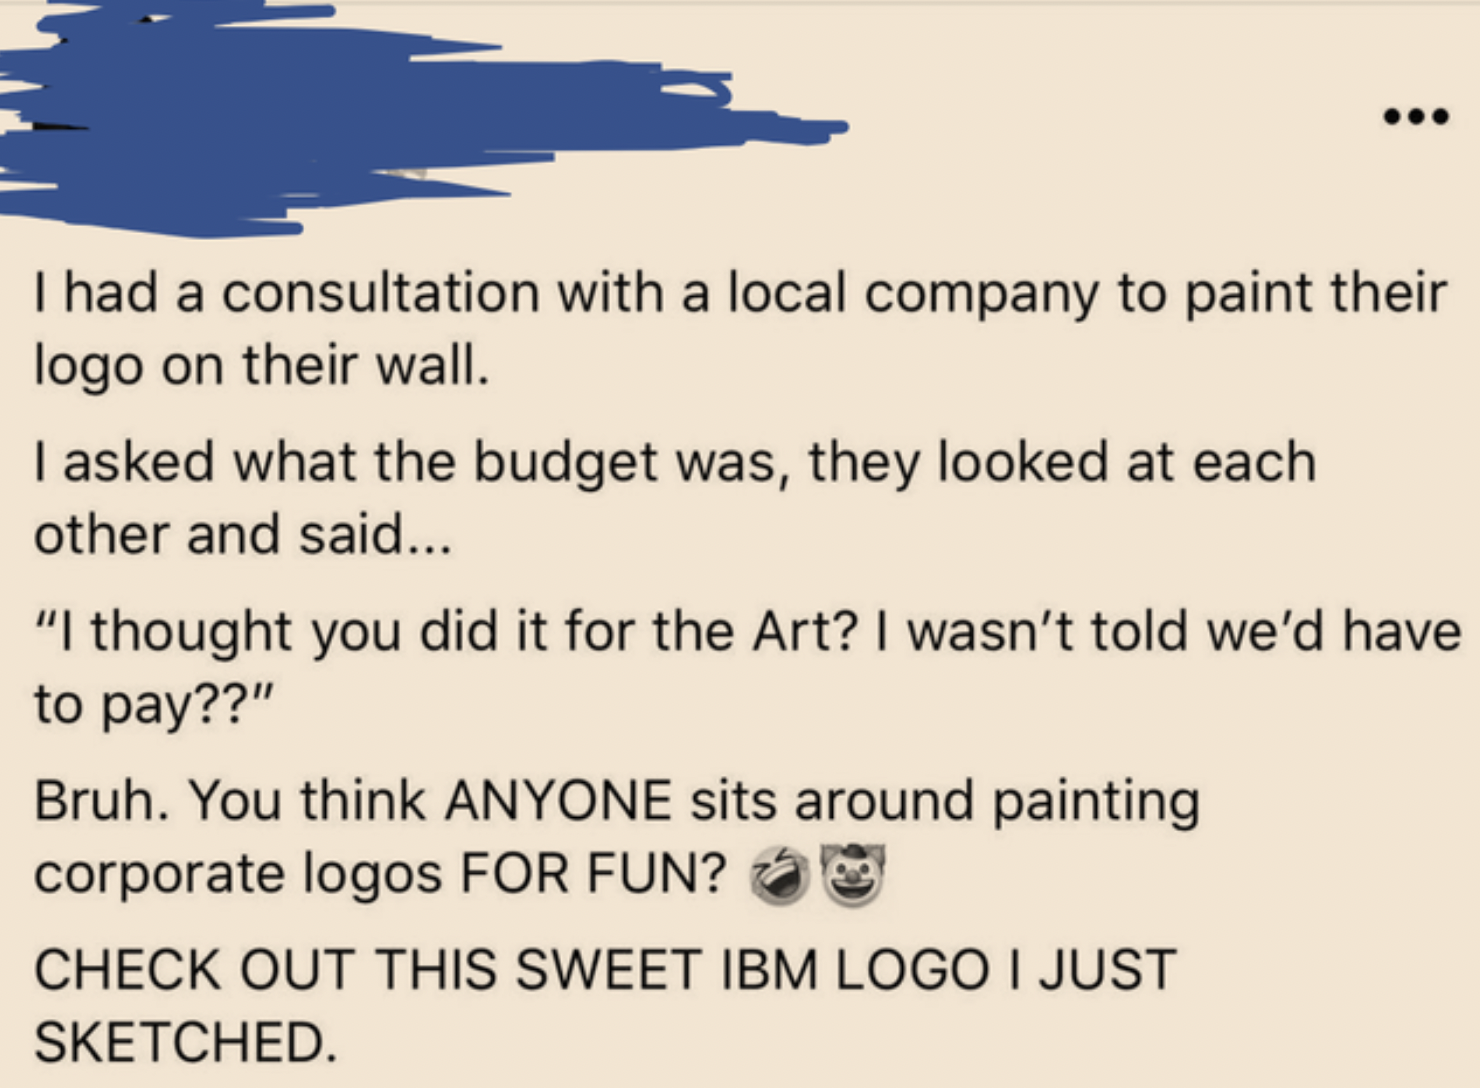 freaky fails - document - I had a consultation with a local company to paint their logo on their wall. I asked what the budget was, they looked at each other and said... ...